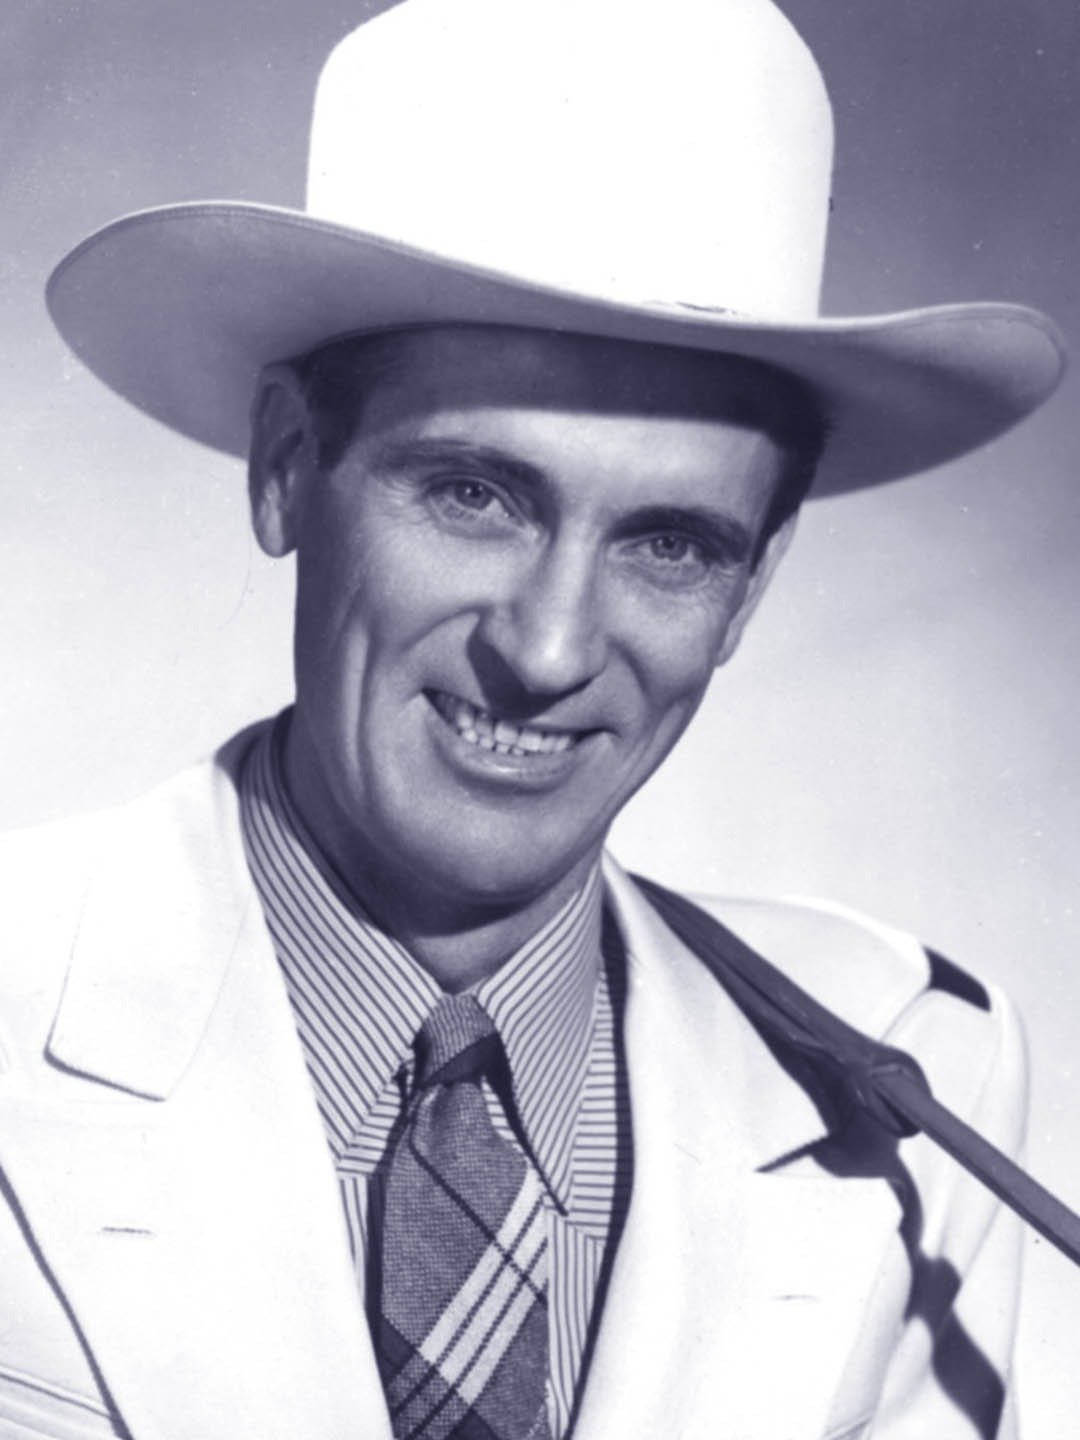 Iconic Country Star Ernest Tubb in Stetson Vintage Portrait Wallpaper